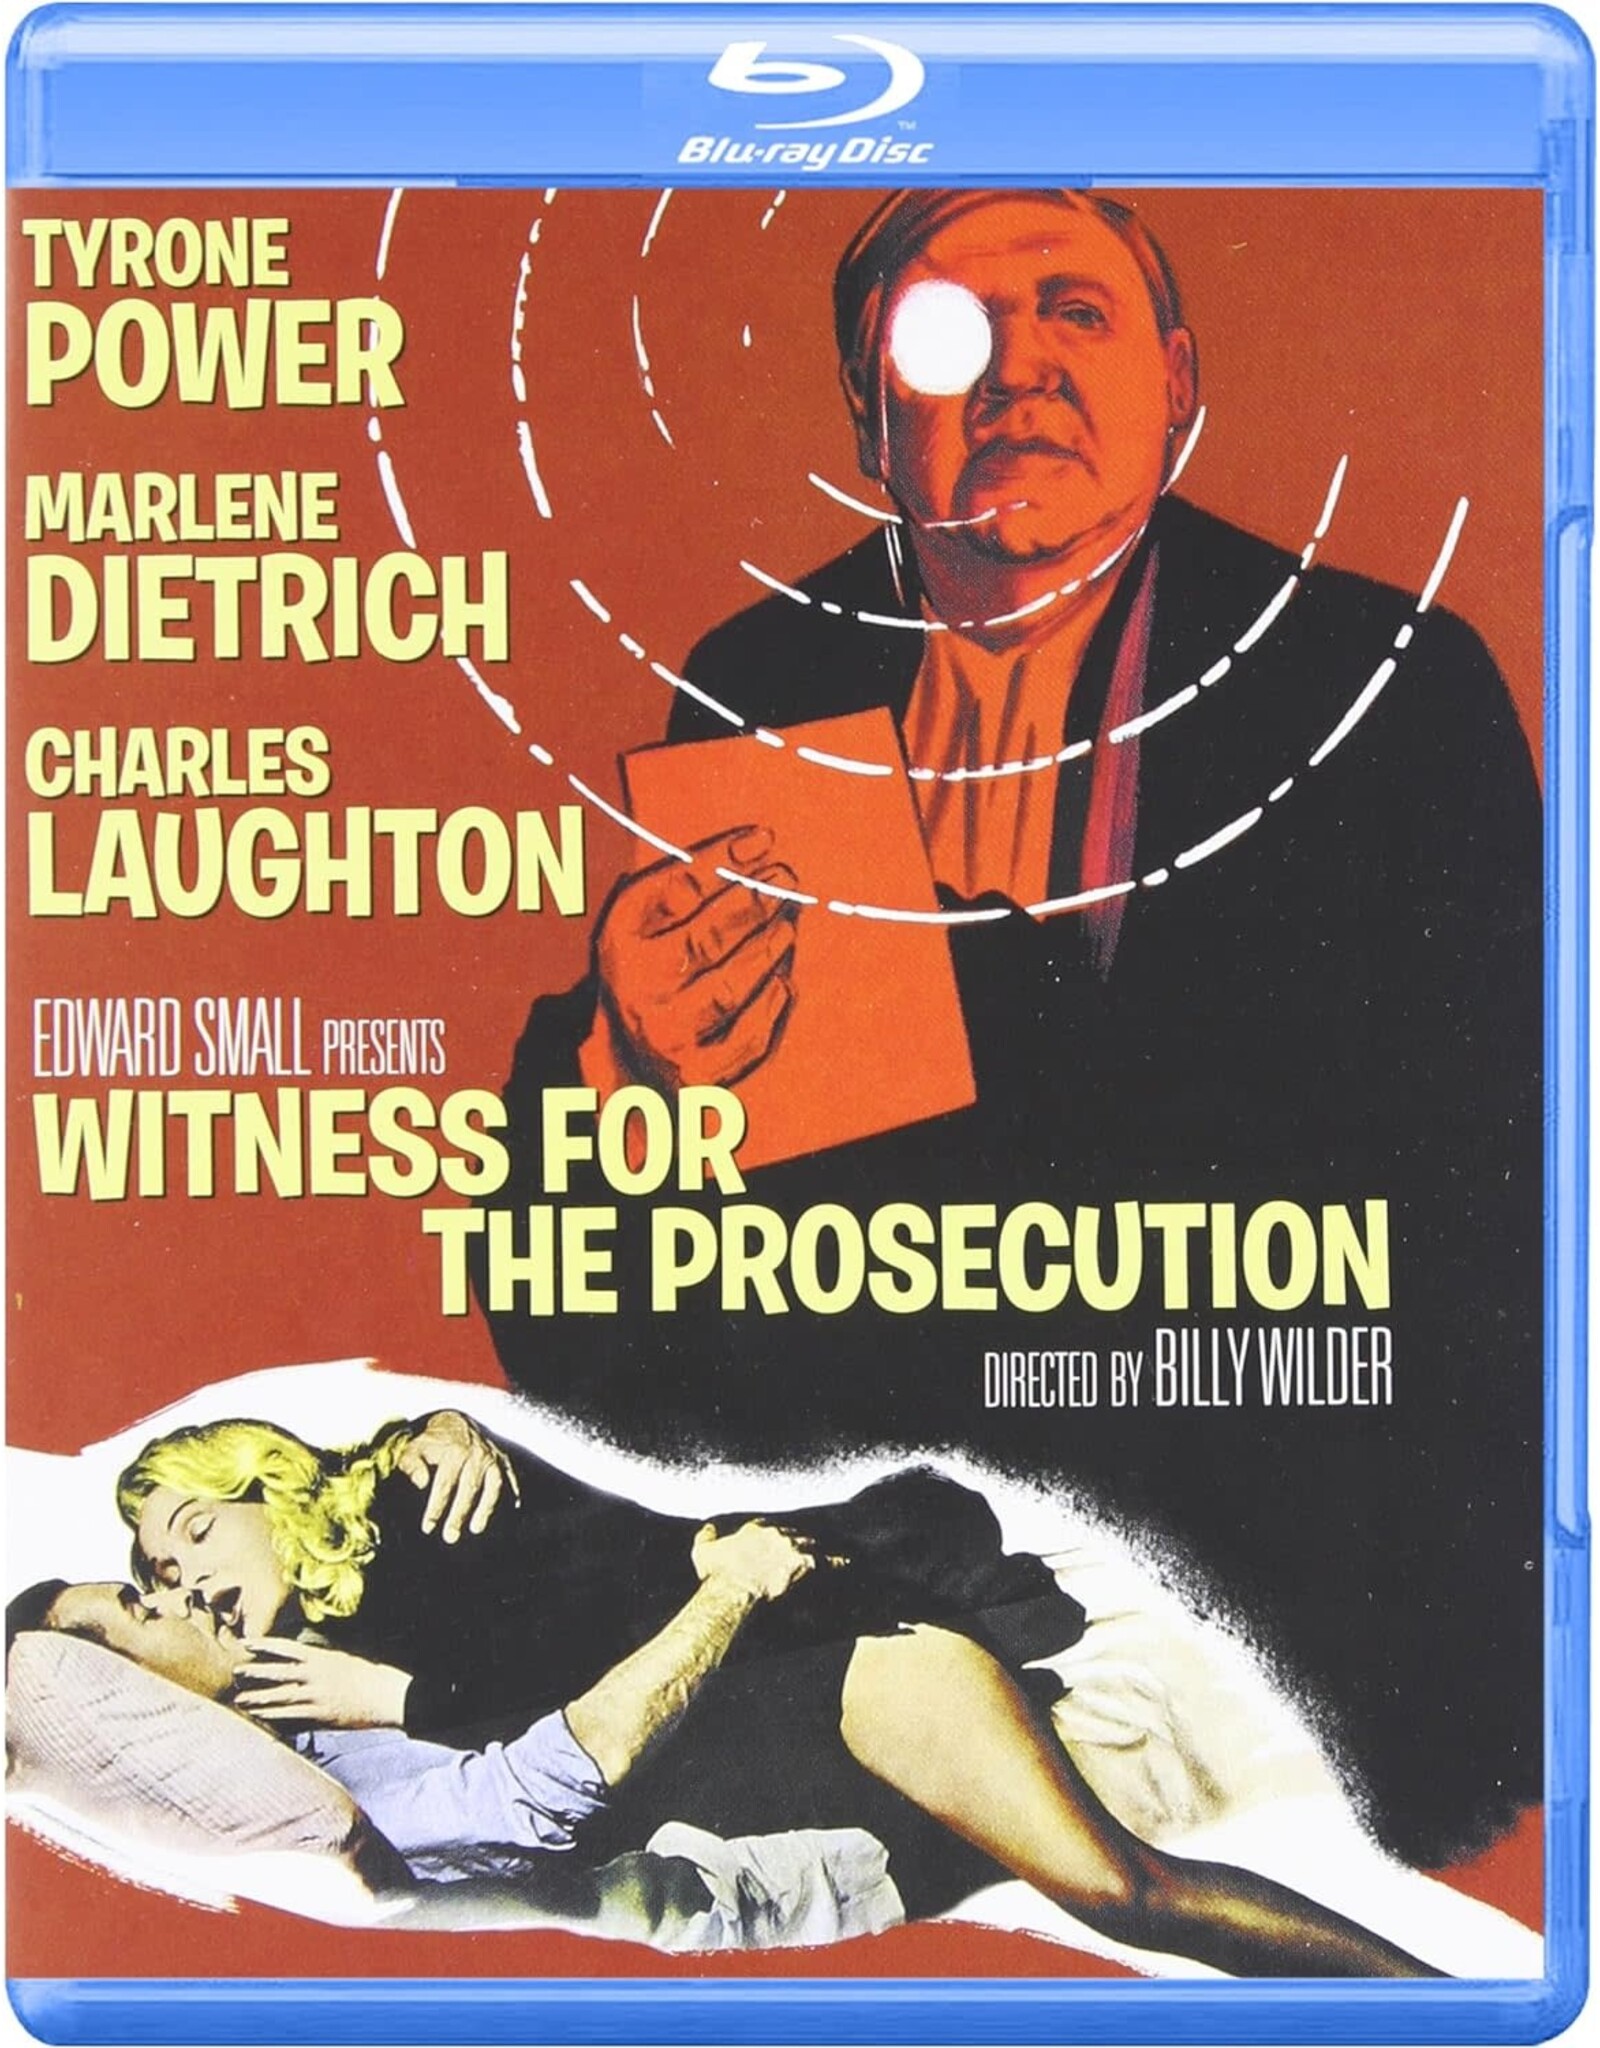 Cult & Cool Witness for the Prosecution - Kino Lorber (Brand New)